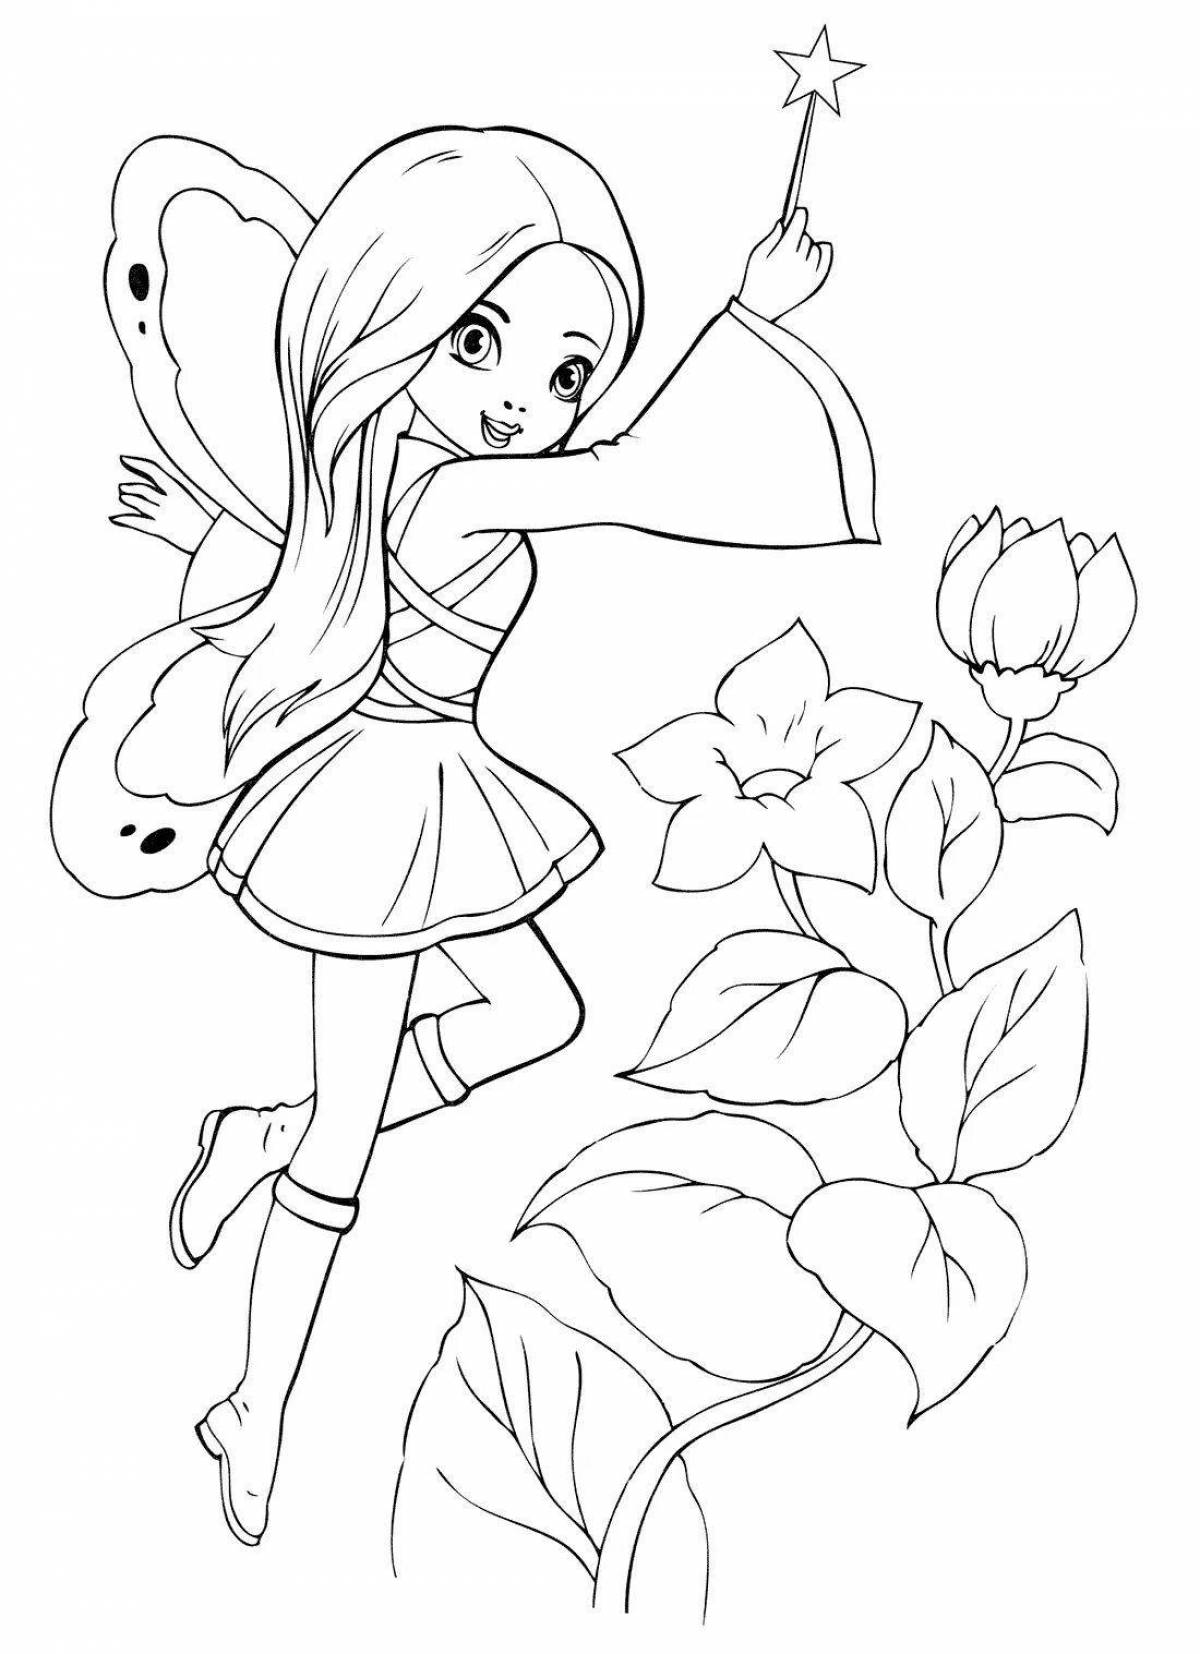 Playful coloring book for girls 6-7 years old